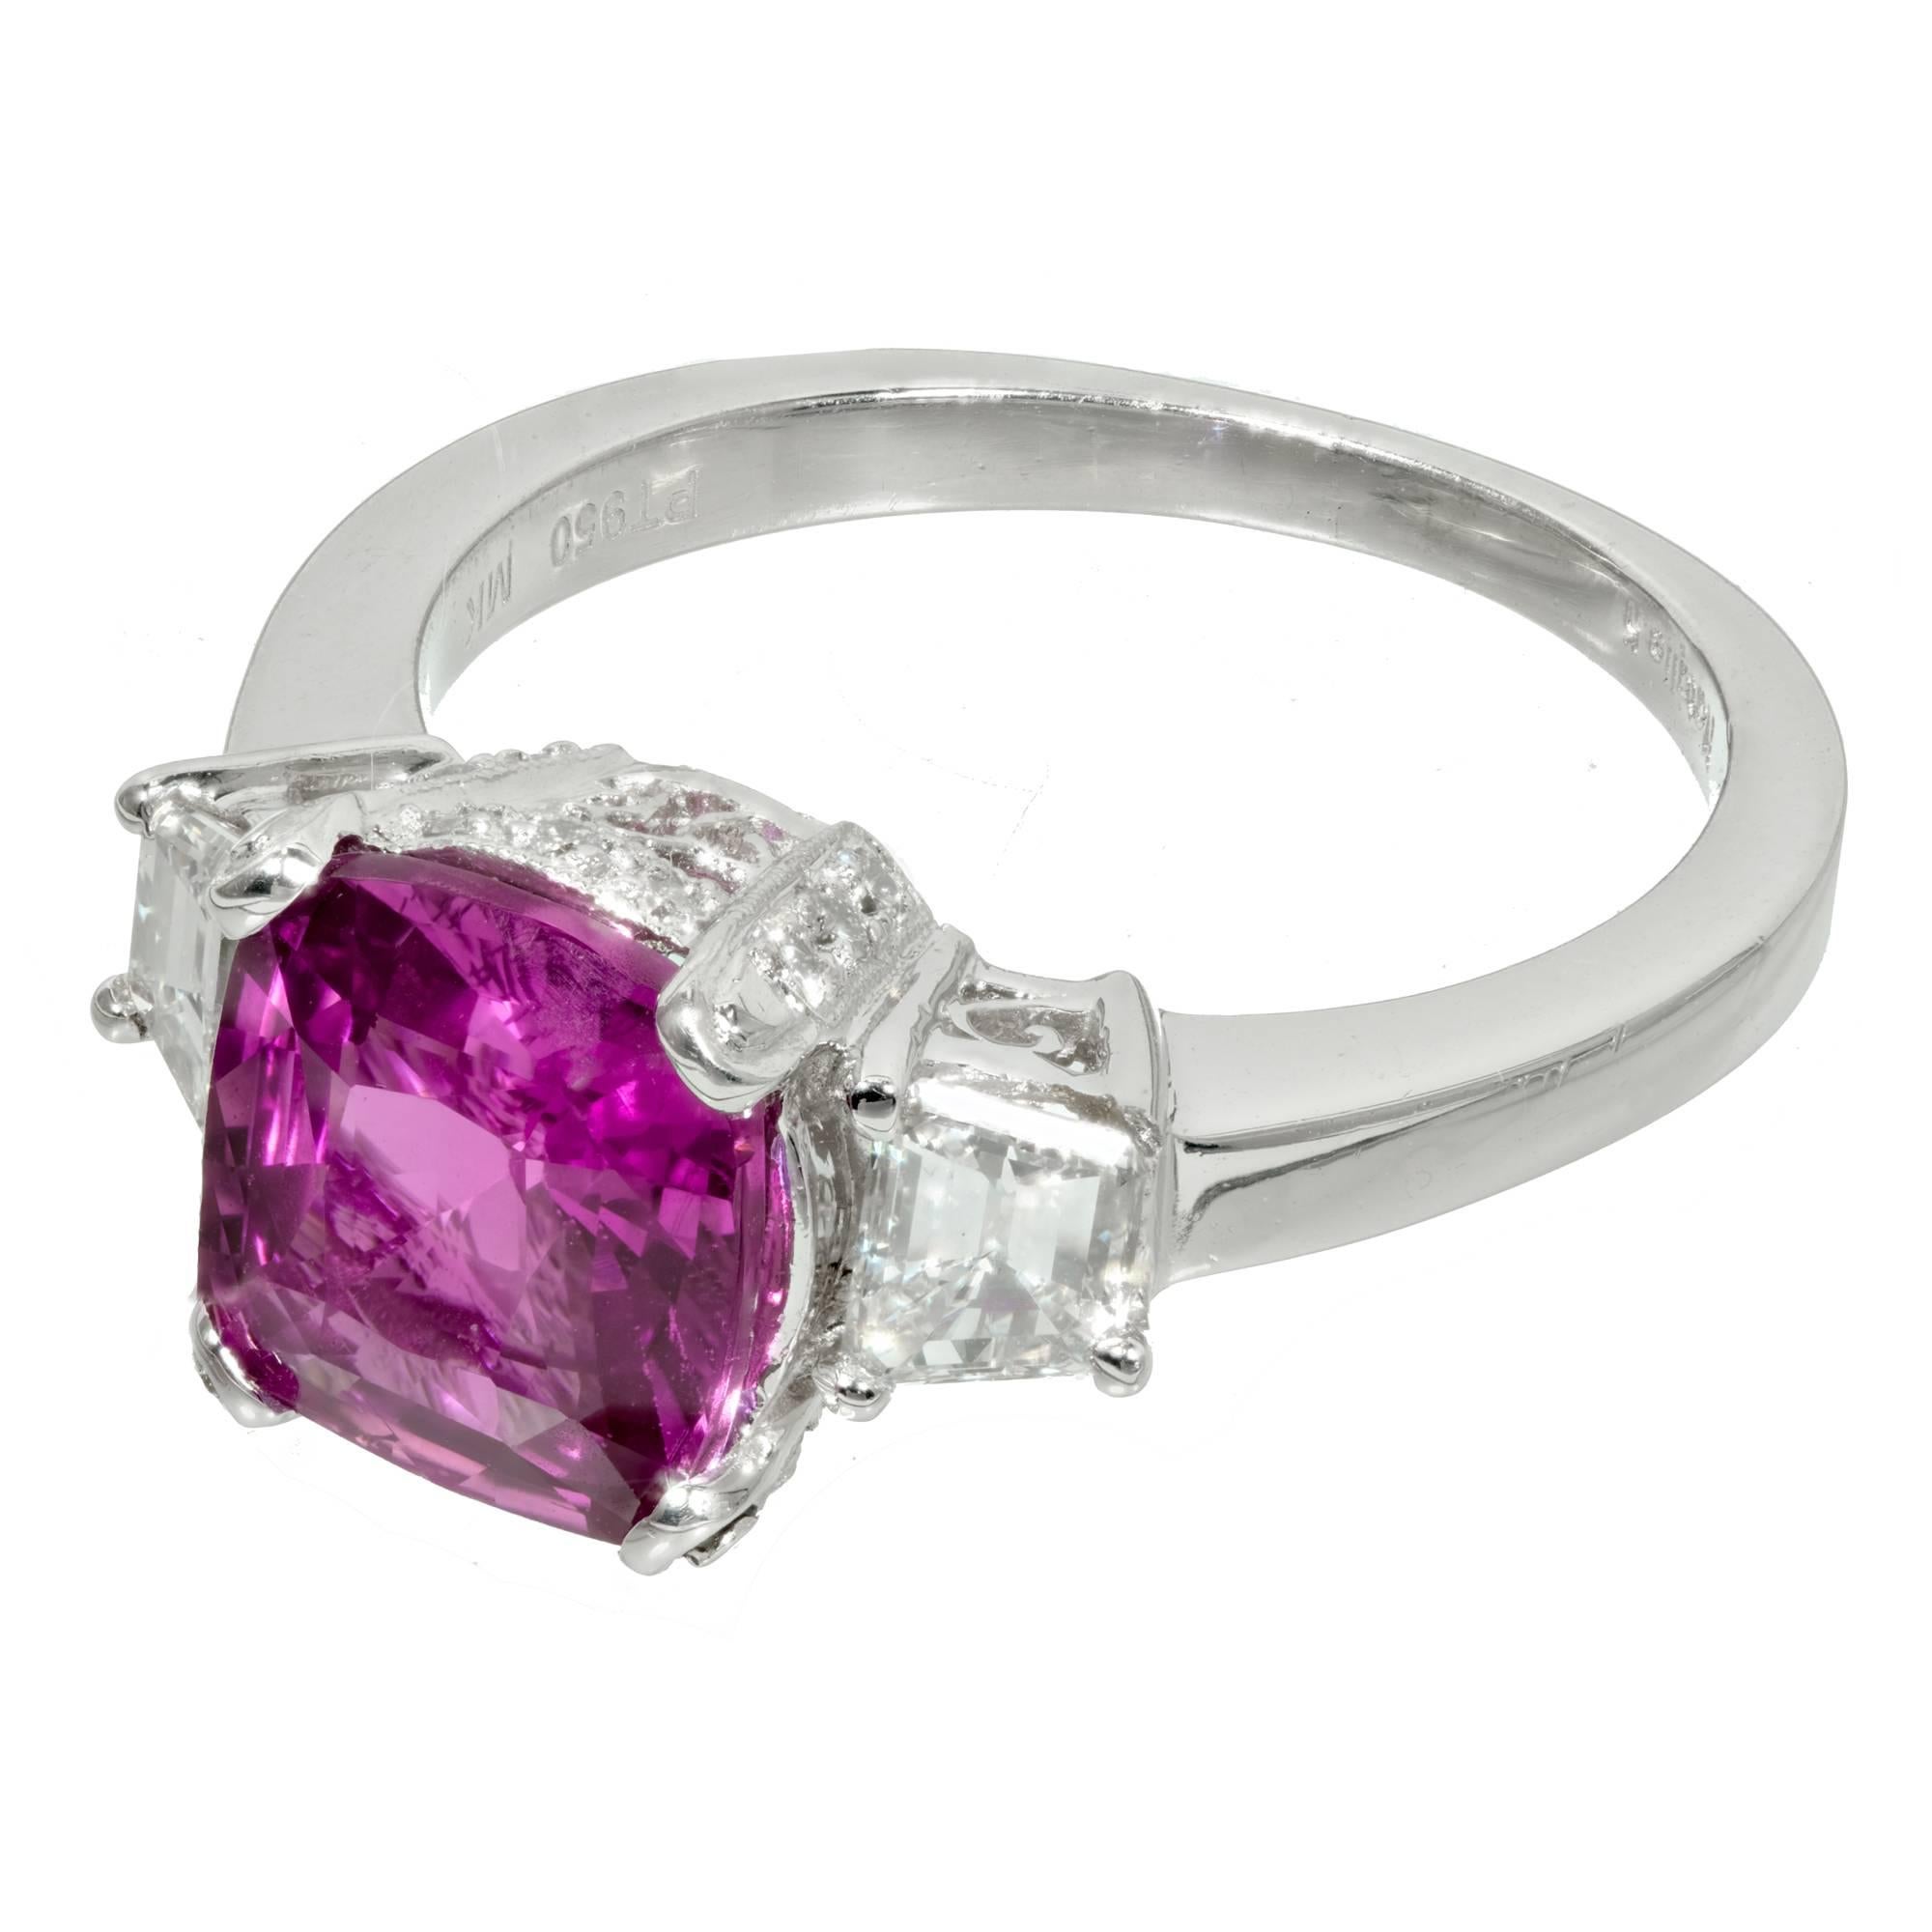 Peter Suchy cushion cut natural purple pink GIA certified no heat Sapphire and diamond three-stone platinum engagement ring. 

1 cushion cut purplish pink Sapphire, approx. total weight 2.76cts, VS, 8.69 x 8.06 x 4.31mm, GIA certificate